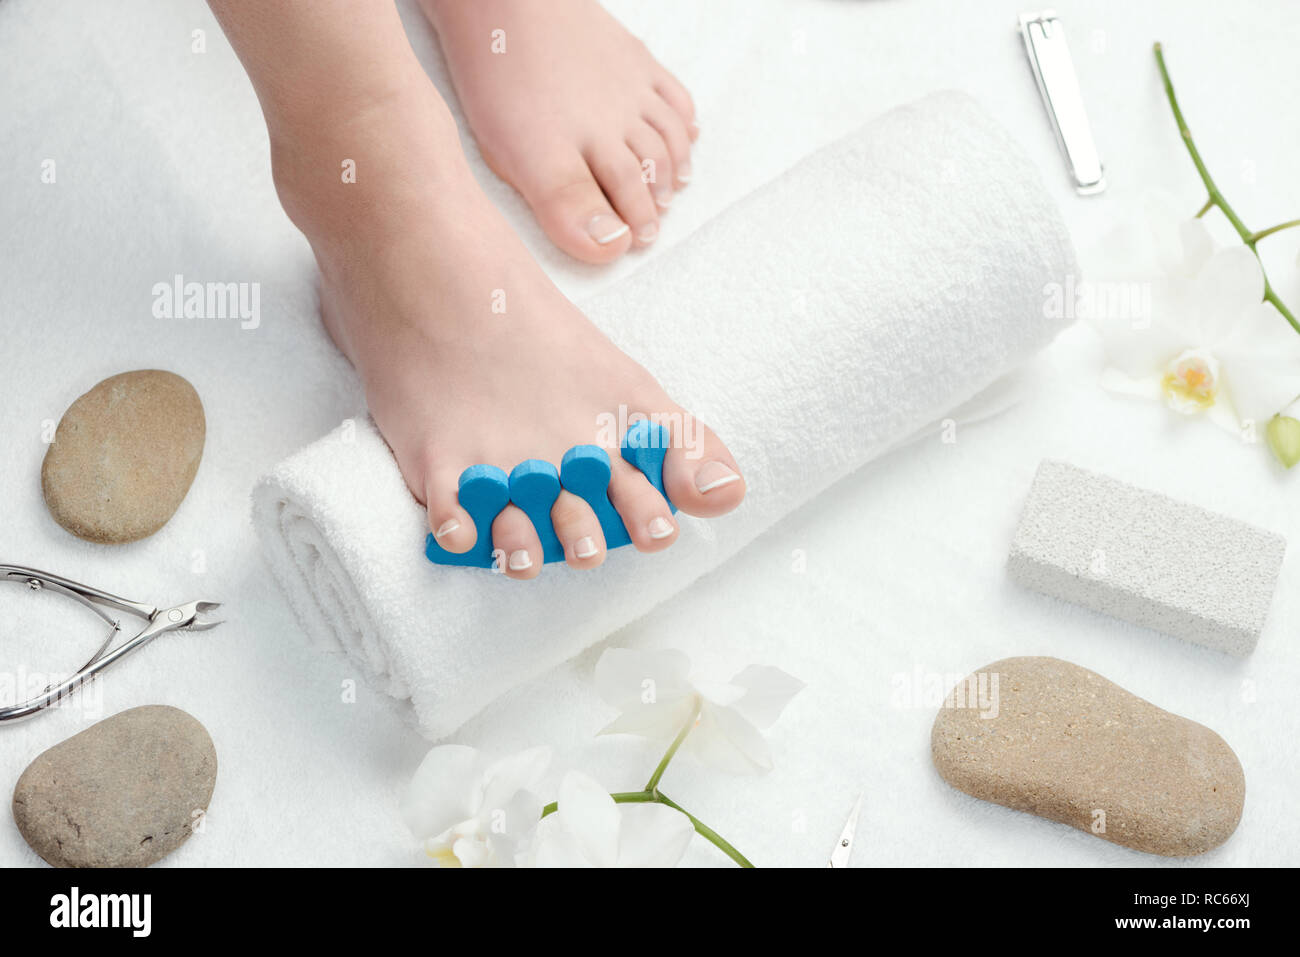 Toes spaced with separator Stock Photo